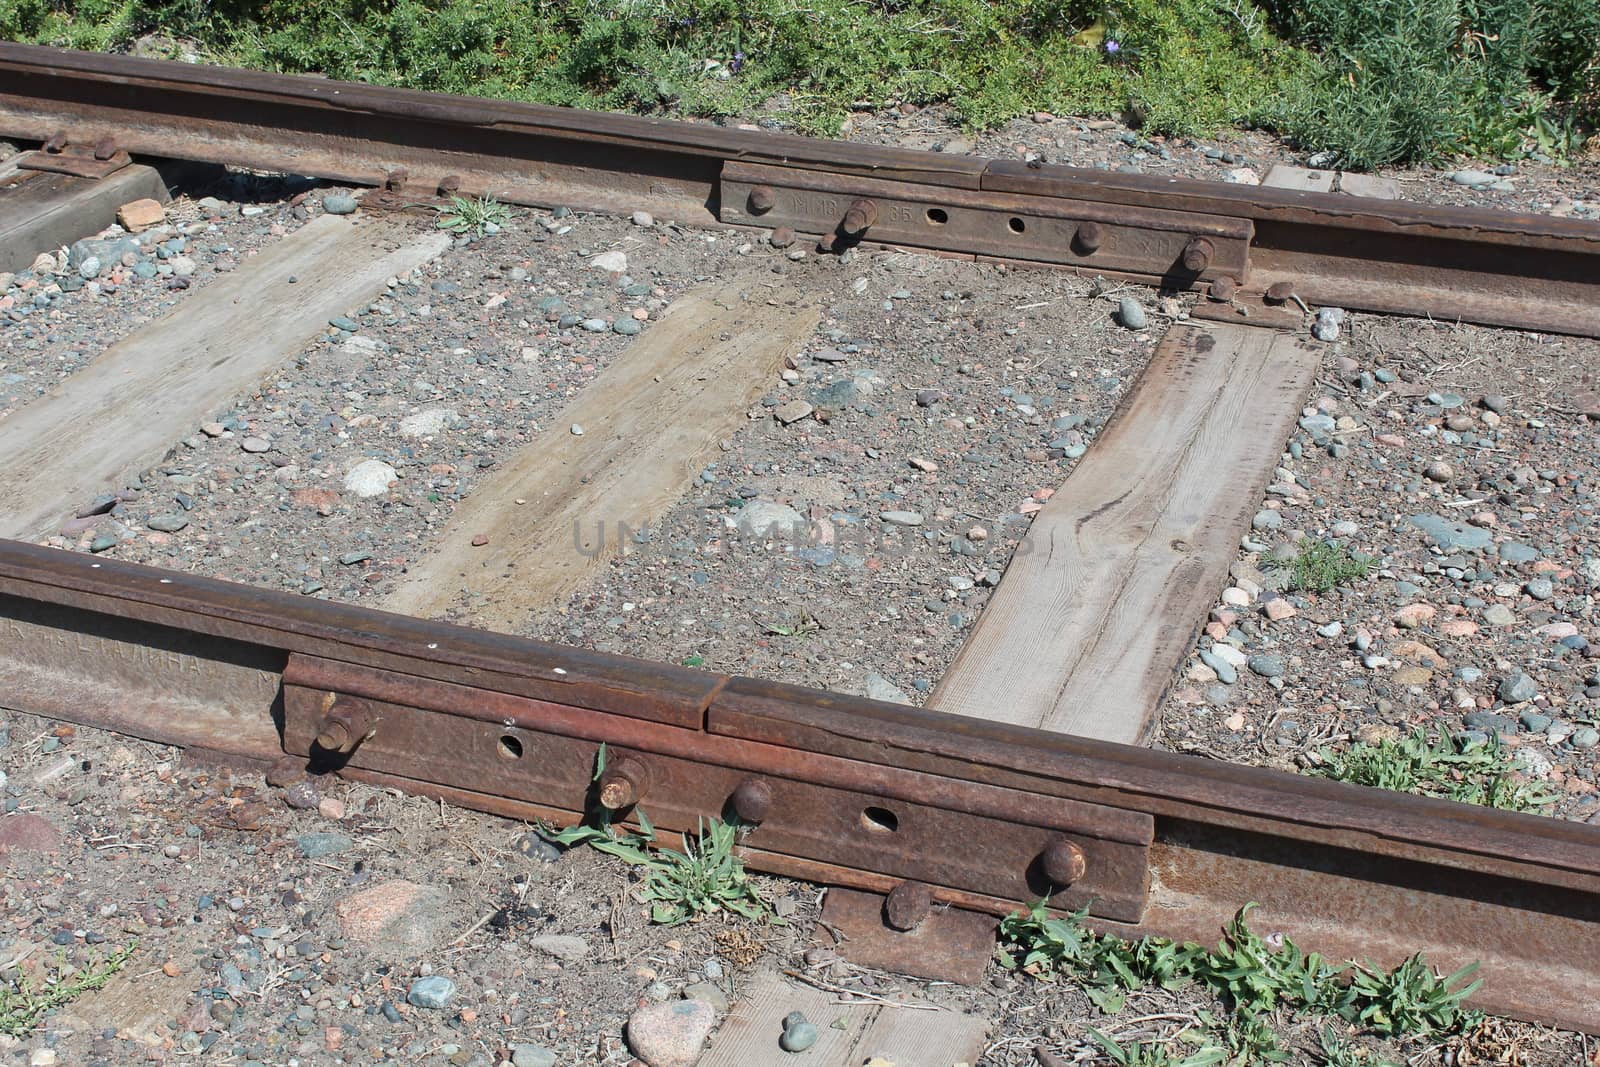 Details of the more than 60 years old railroad.